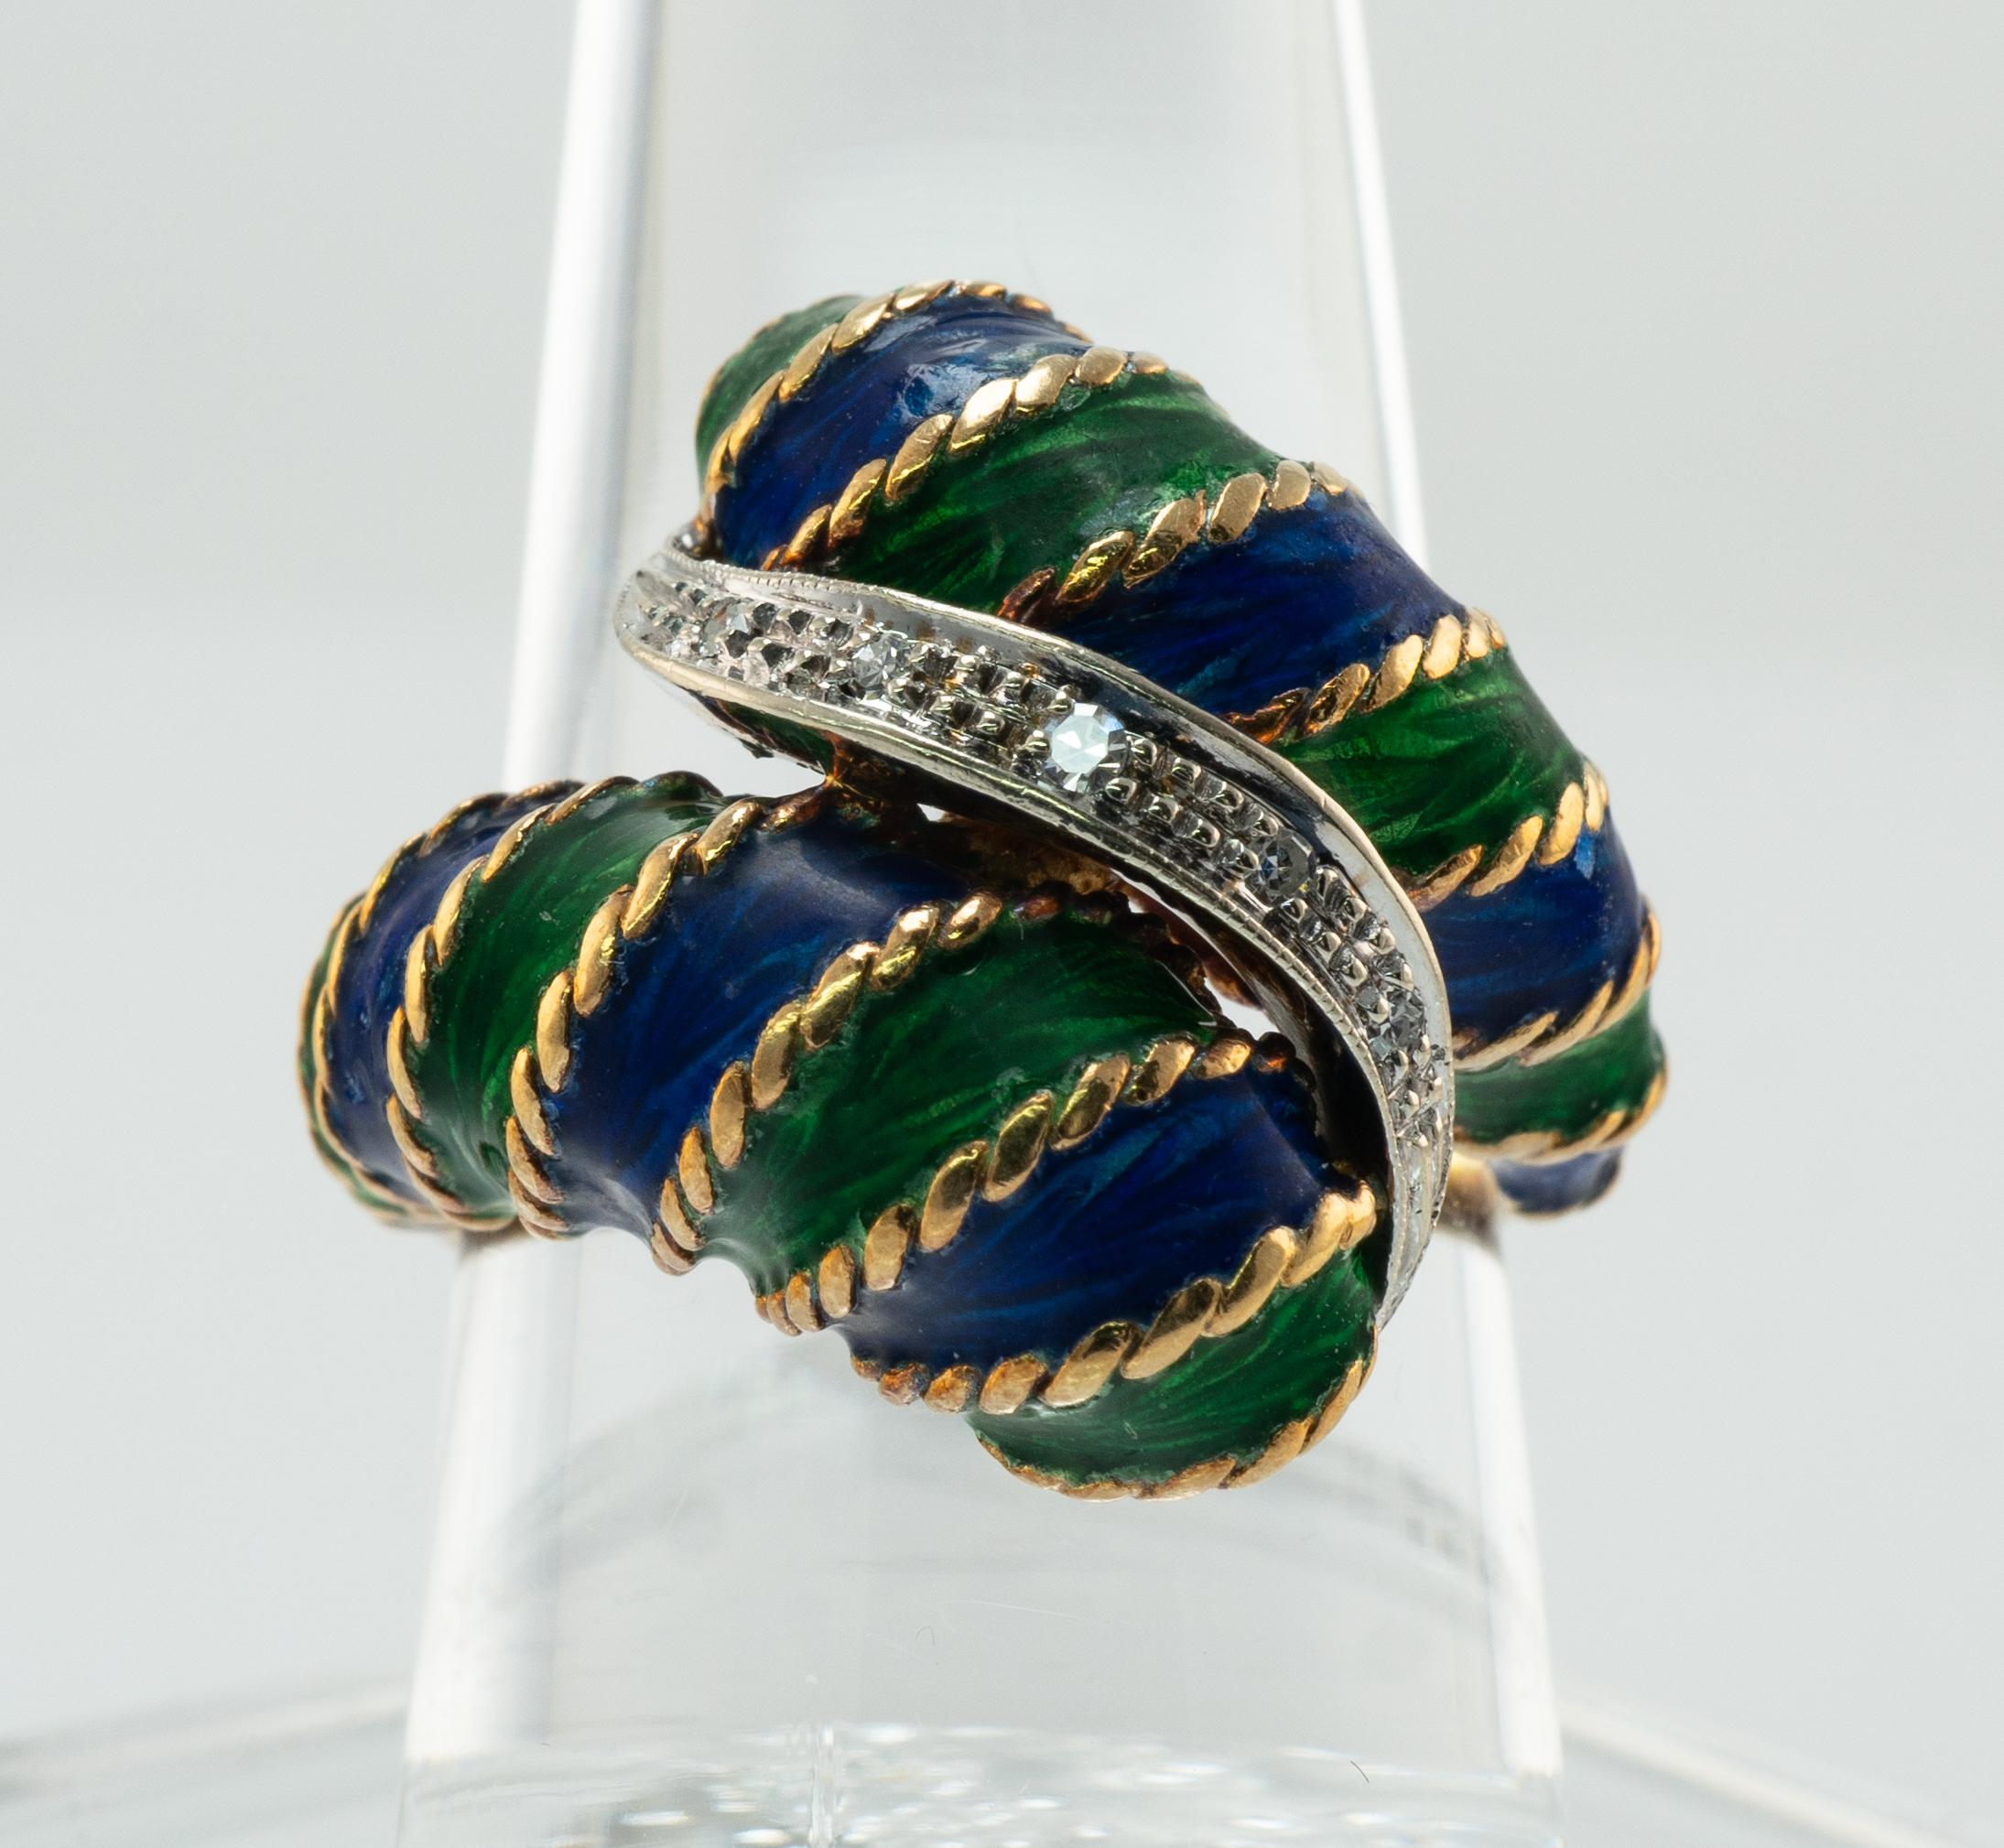 Diamond Enamel Ring 18K Gold Band Vintage Italy

This vintage ring is crafted in solid 18K gold.
Made in Italy.
Blue and green enamel is in great vintage condition.
Five single cut Diamonds are set in white gold.
The diamonds are VVS2 clarity and G